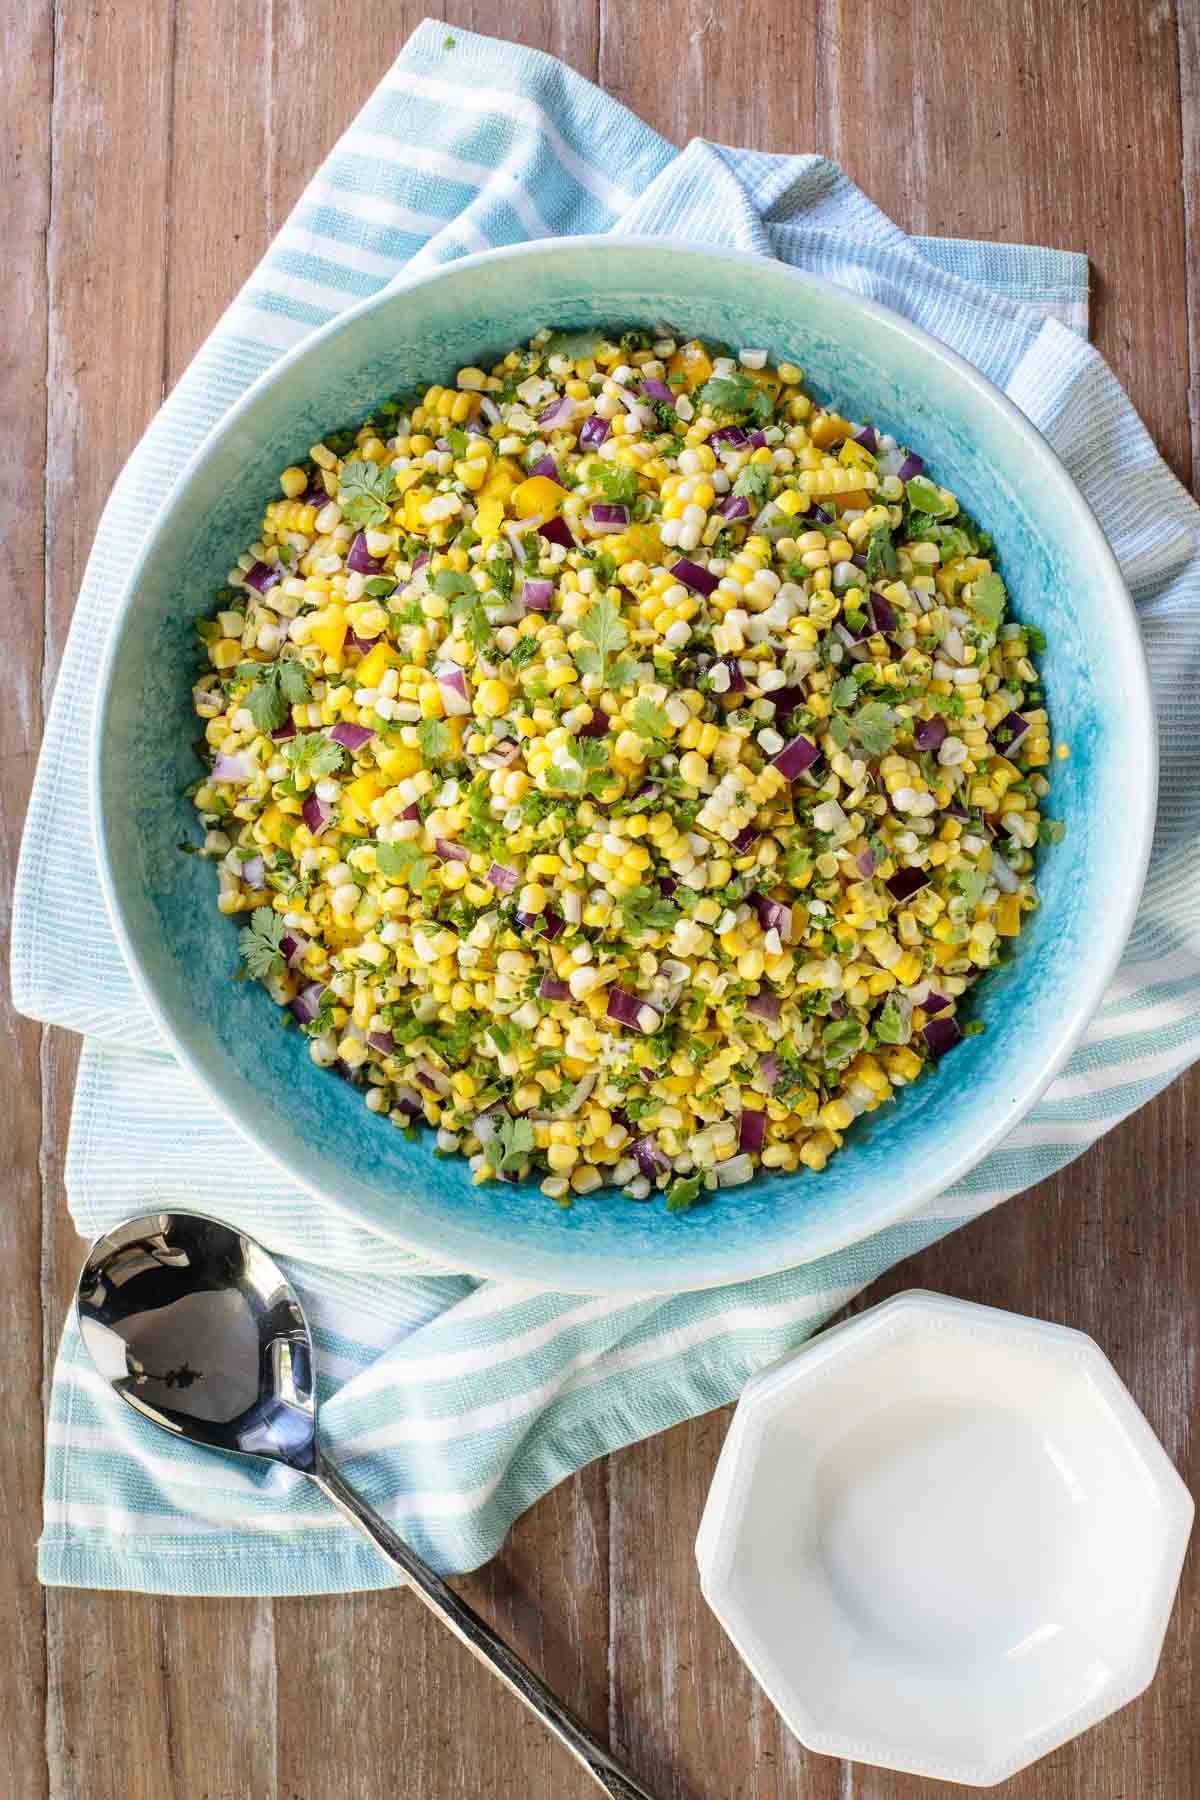 Overhead photo of a turquoise serving bowl of Fresh Corn Salad with a patterned cloth underneath on a distressed wood table.